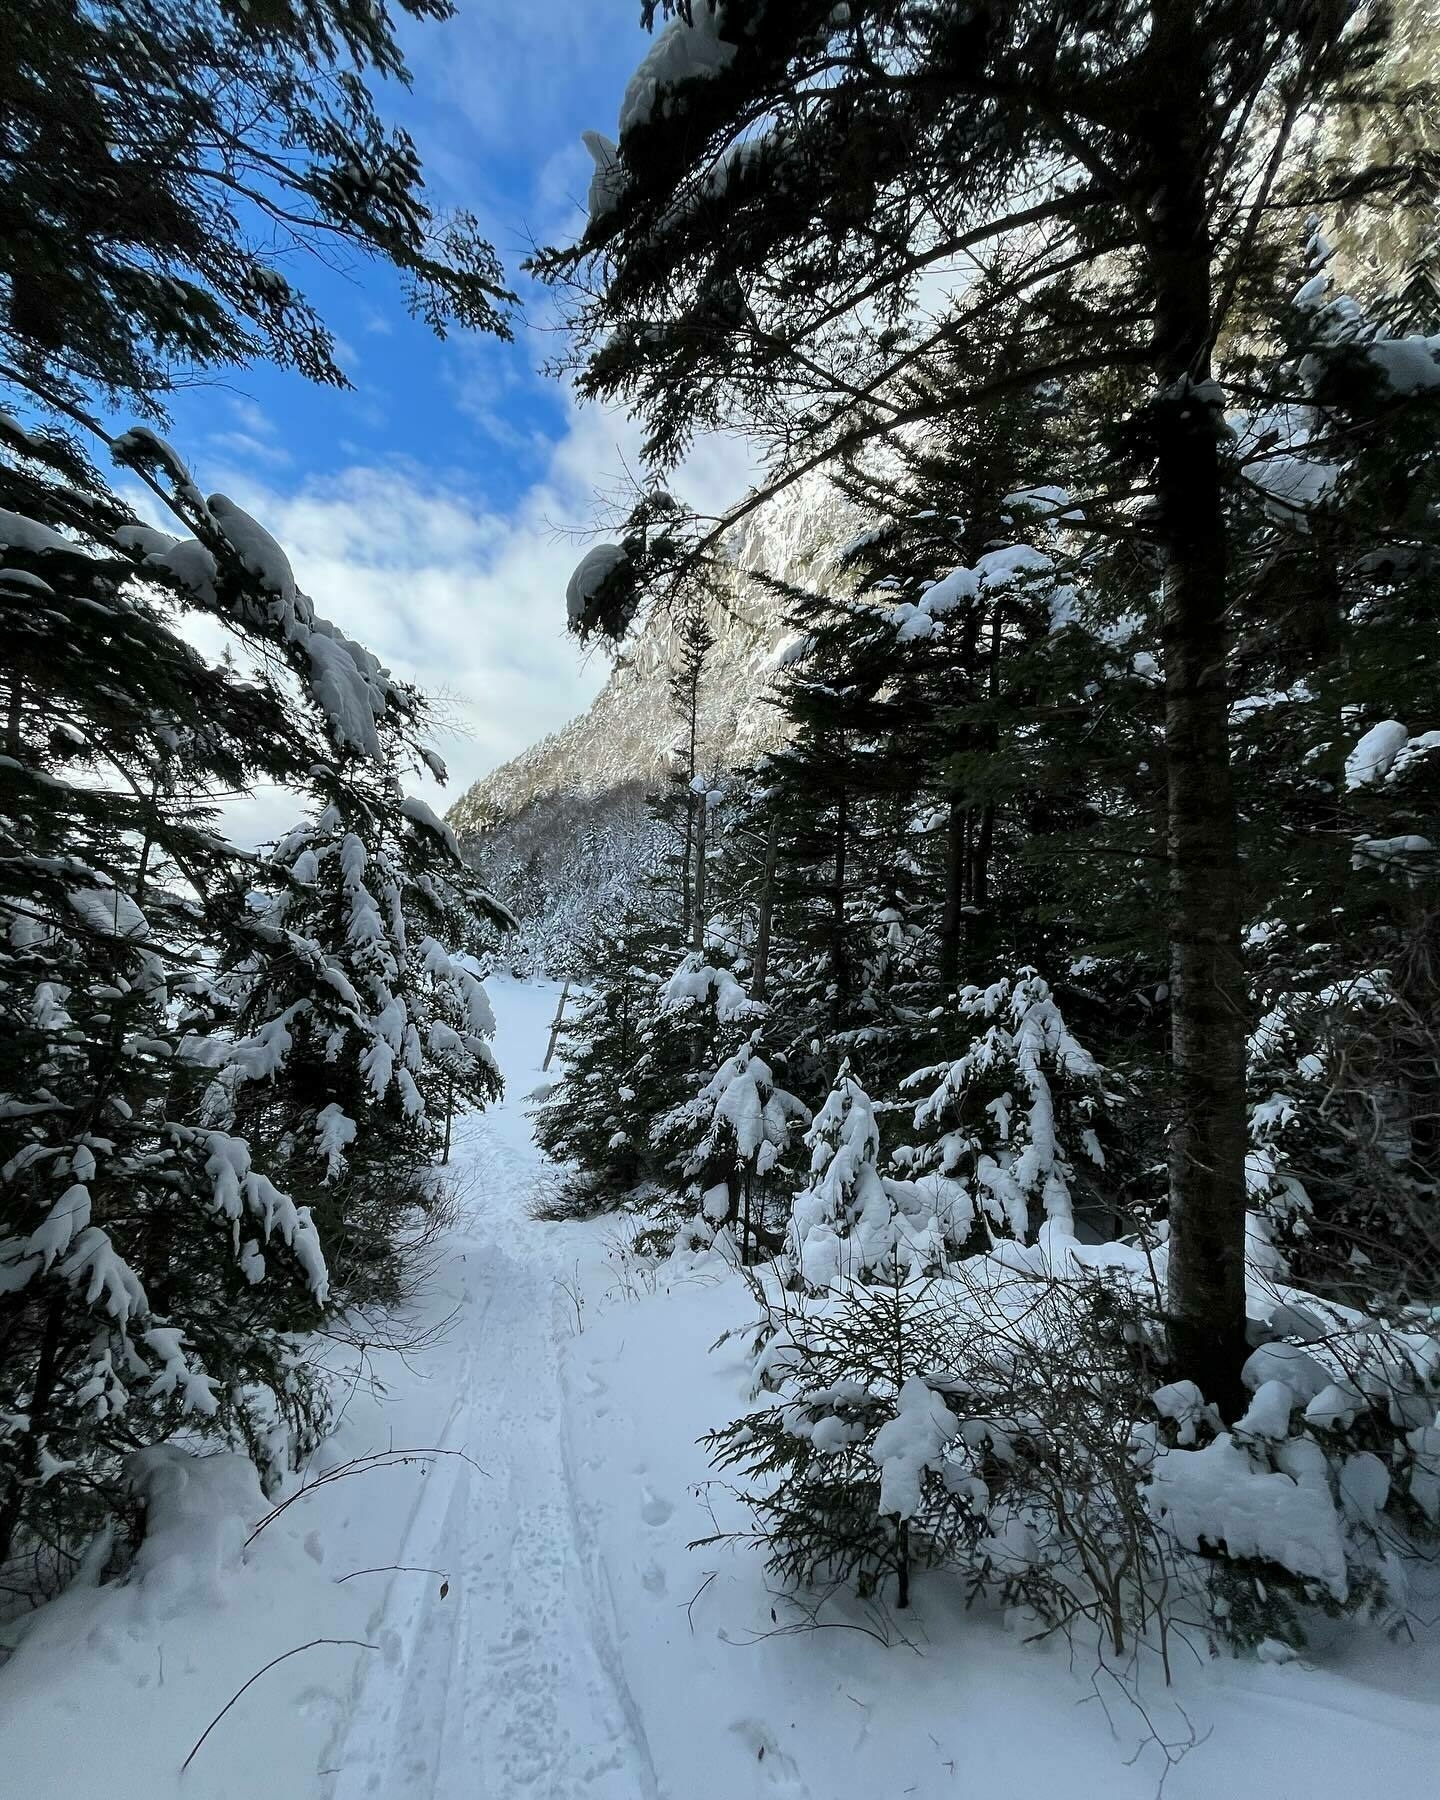 A snowy trail leads through a dense coniferous forest towards a mountain; the trees are heavily laden with snow under a bright blue sky.